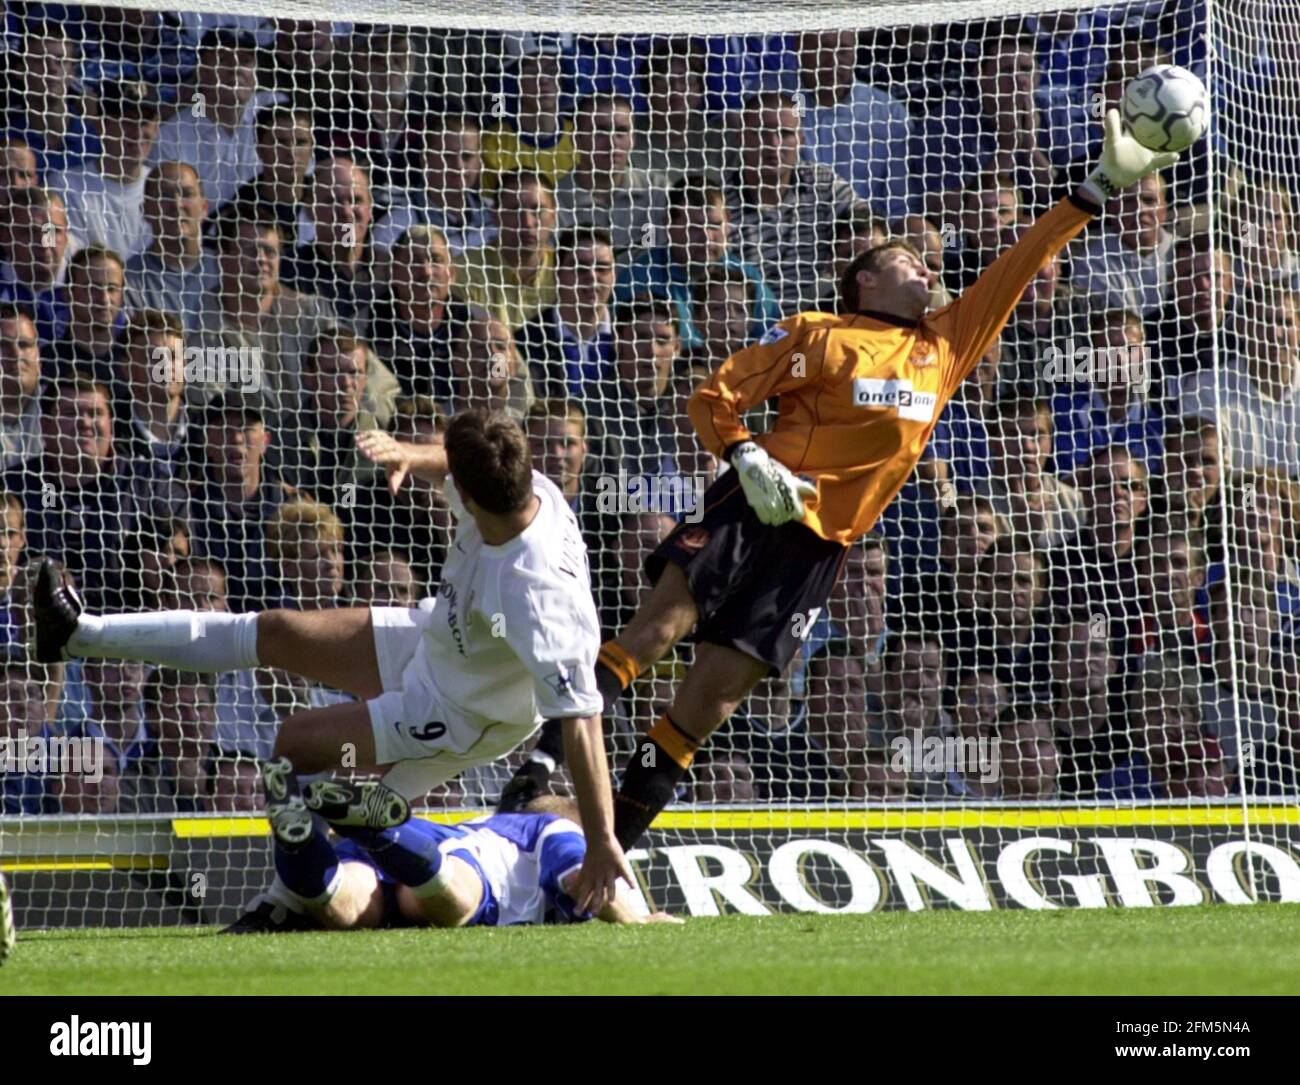 Leeds United v Everton August 2000 Paul Gerrard saves from Mark Viduka during the match at Elland Road. The ended Leeds 2 Everton 0 Stock Photo